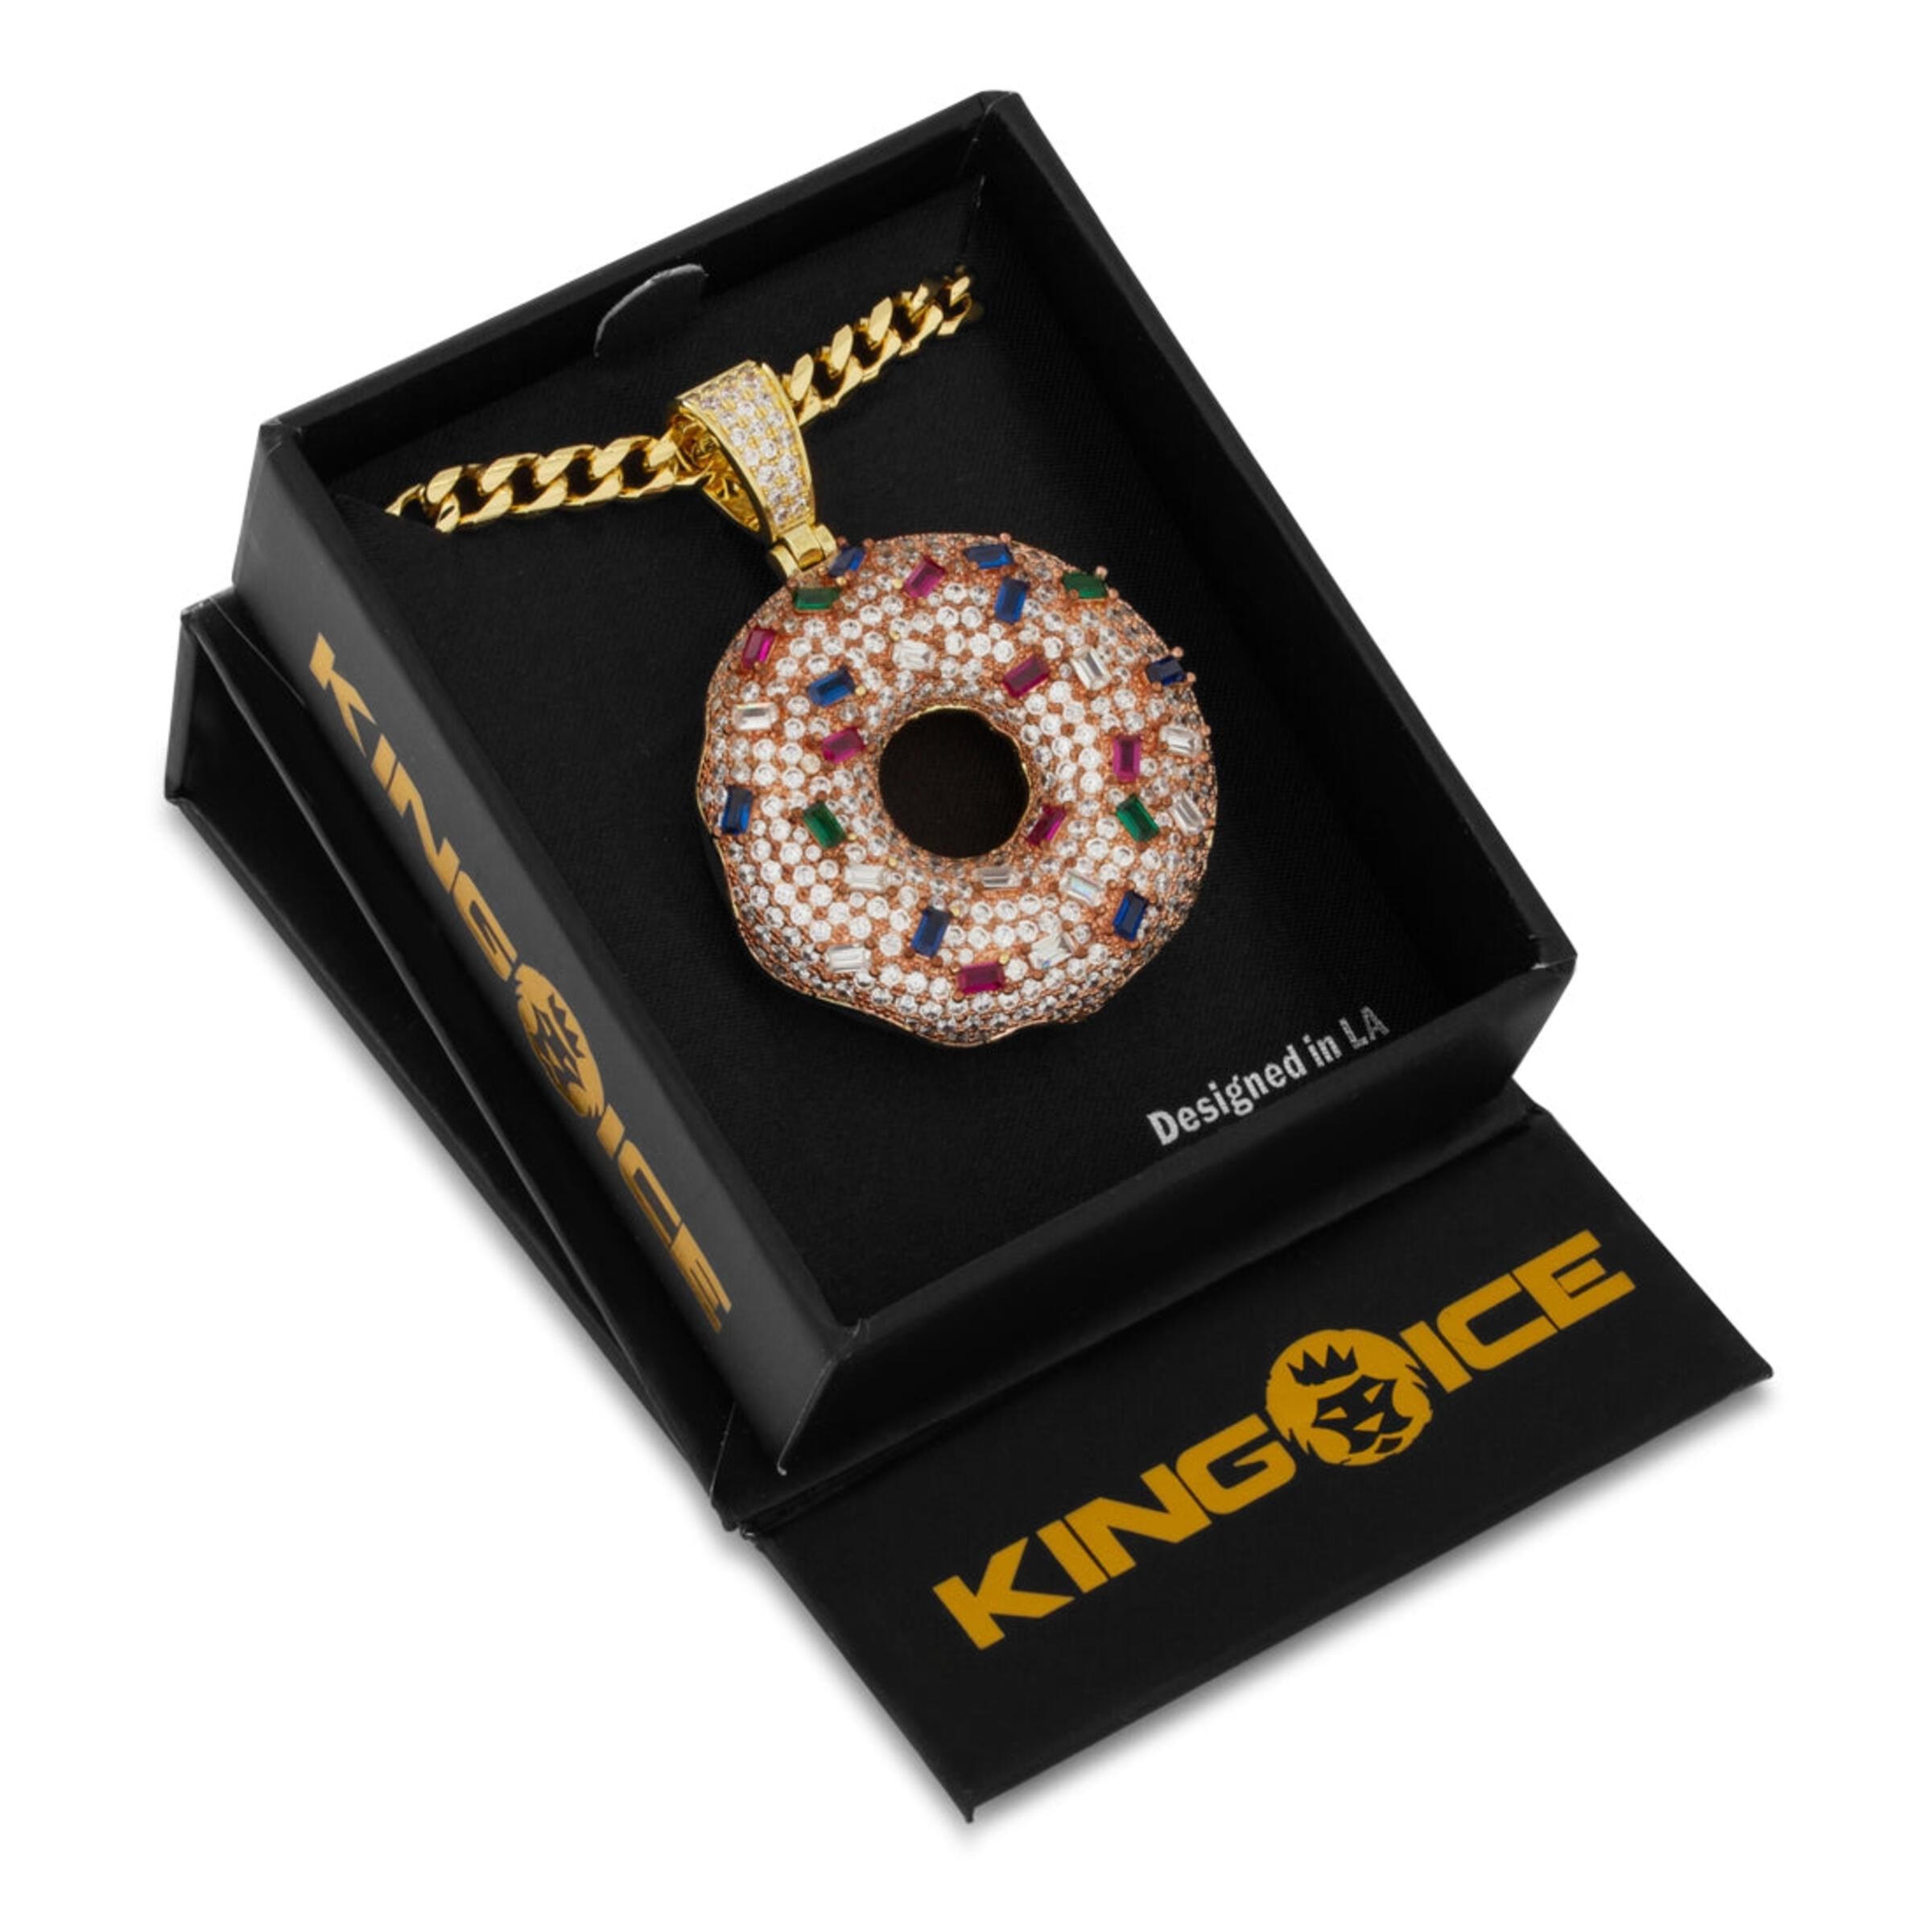 King Ice Pink Donut Necklace - 14K Gold